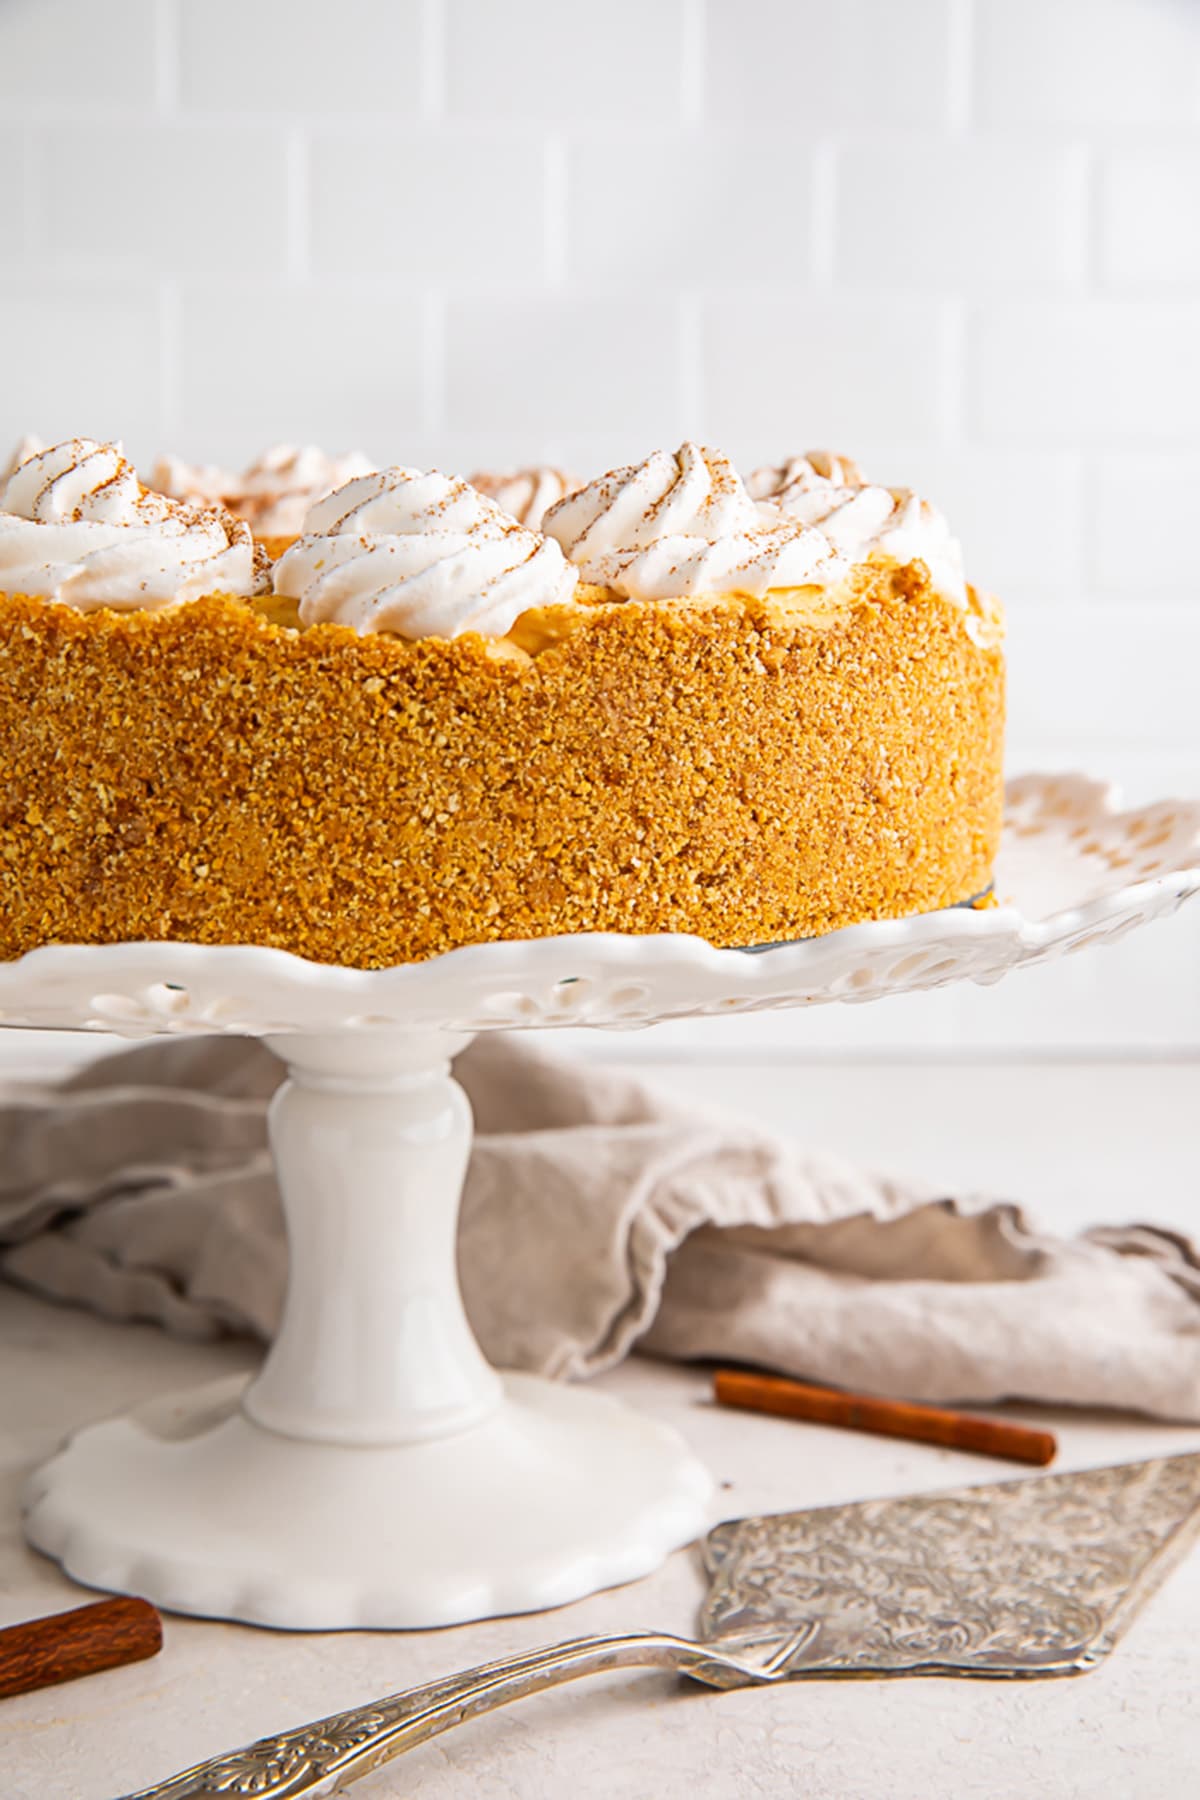 Side view of a whole no bake pumpkin cheesecake on a white cake stand, showing off the side of the crust.